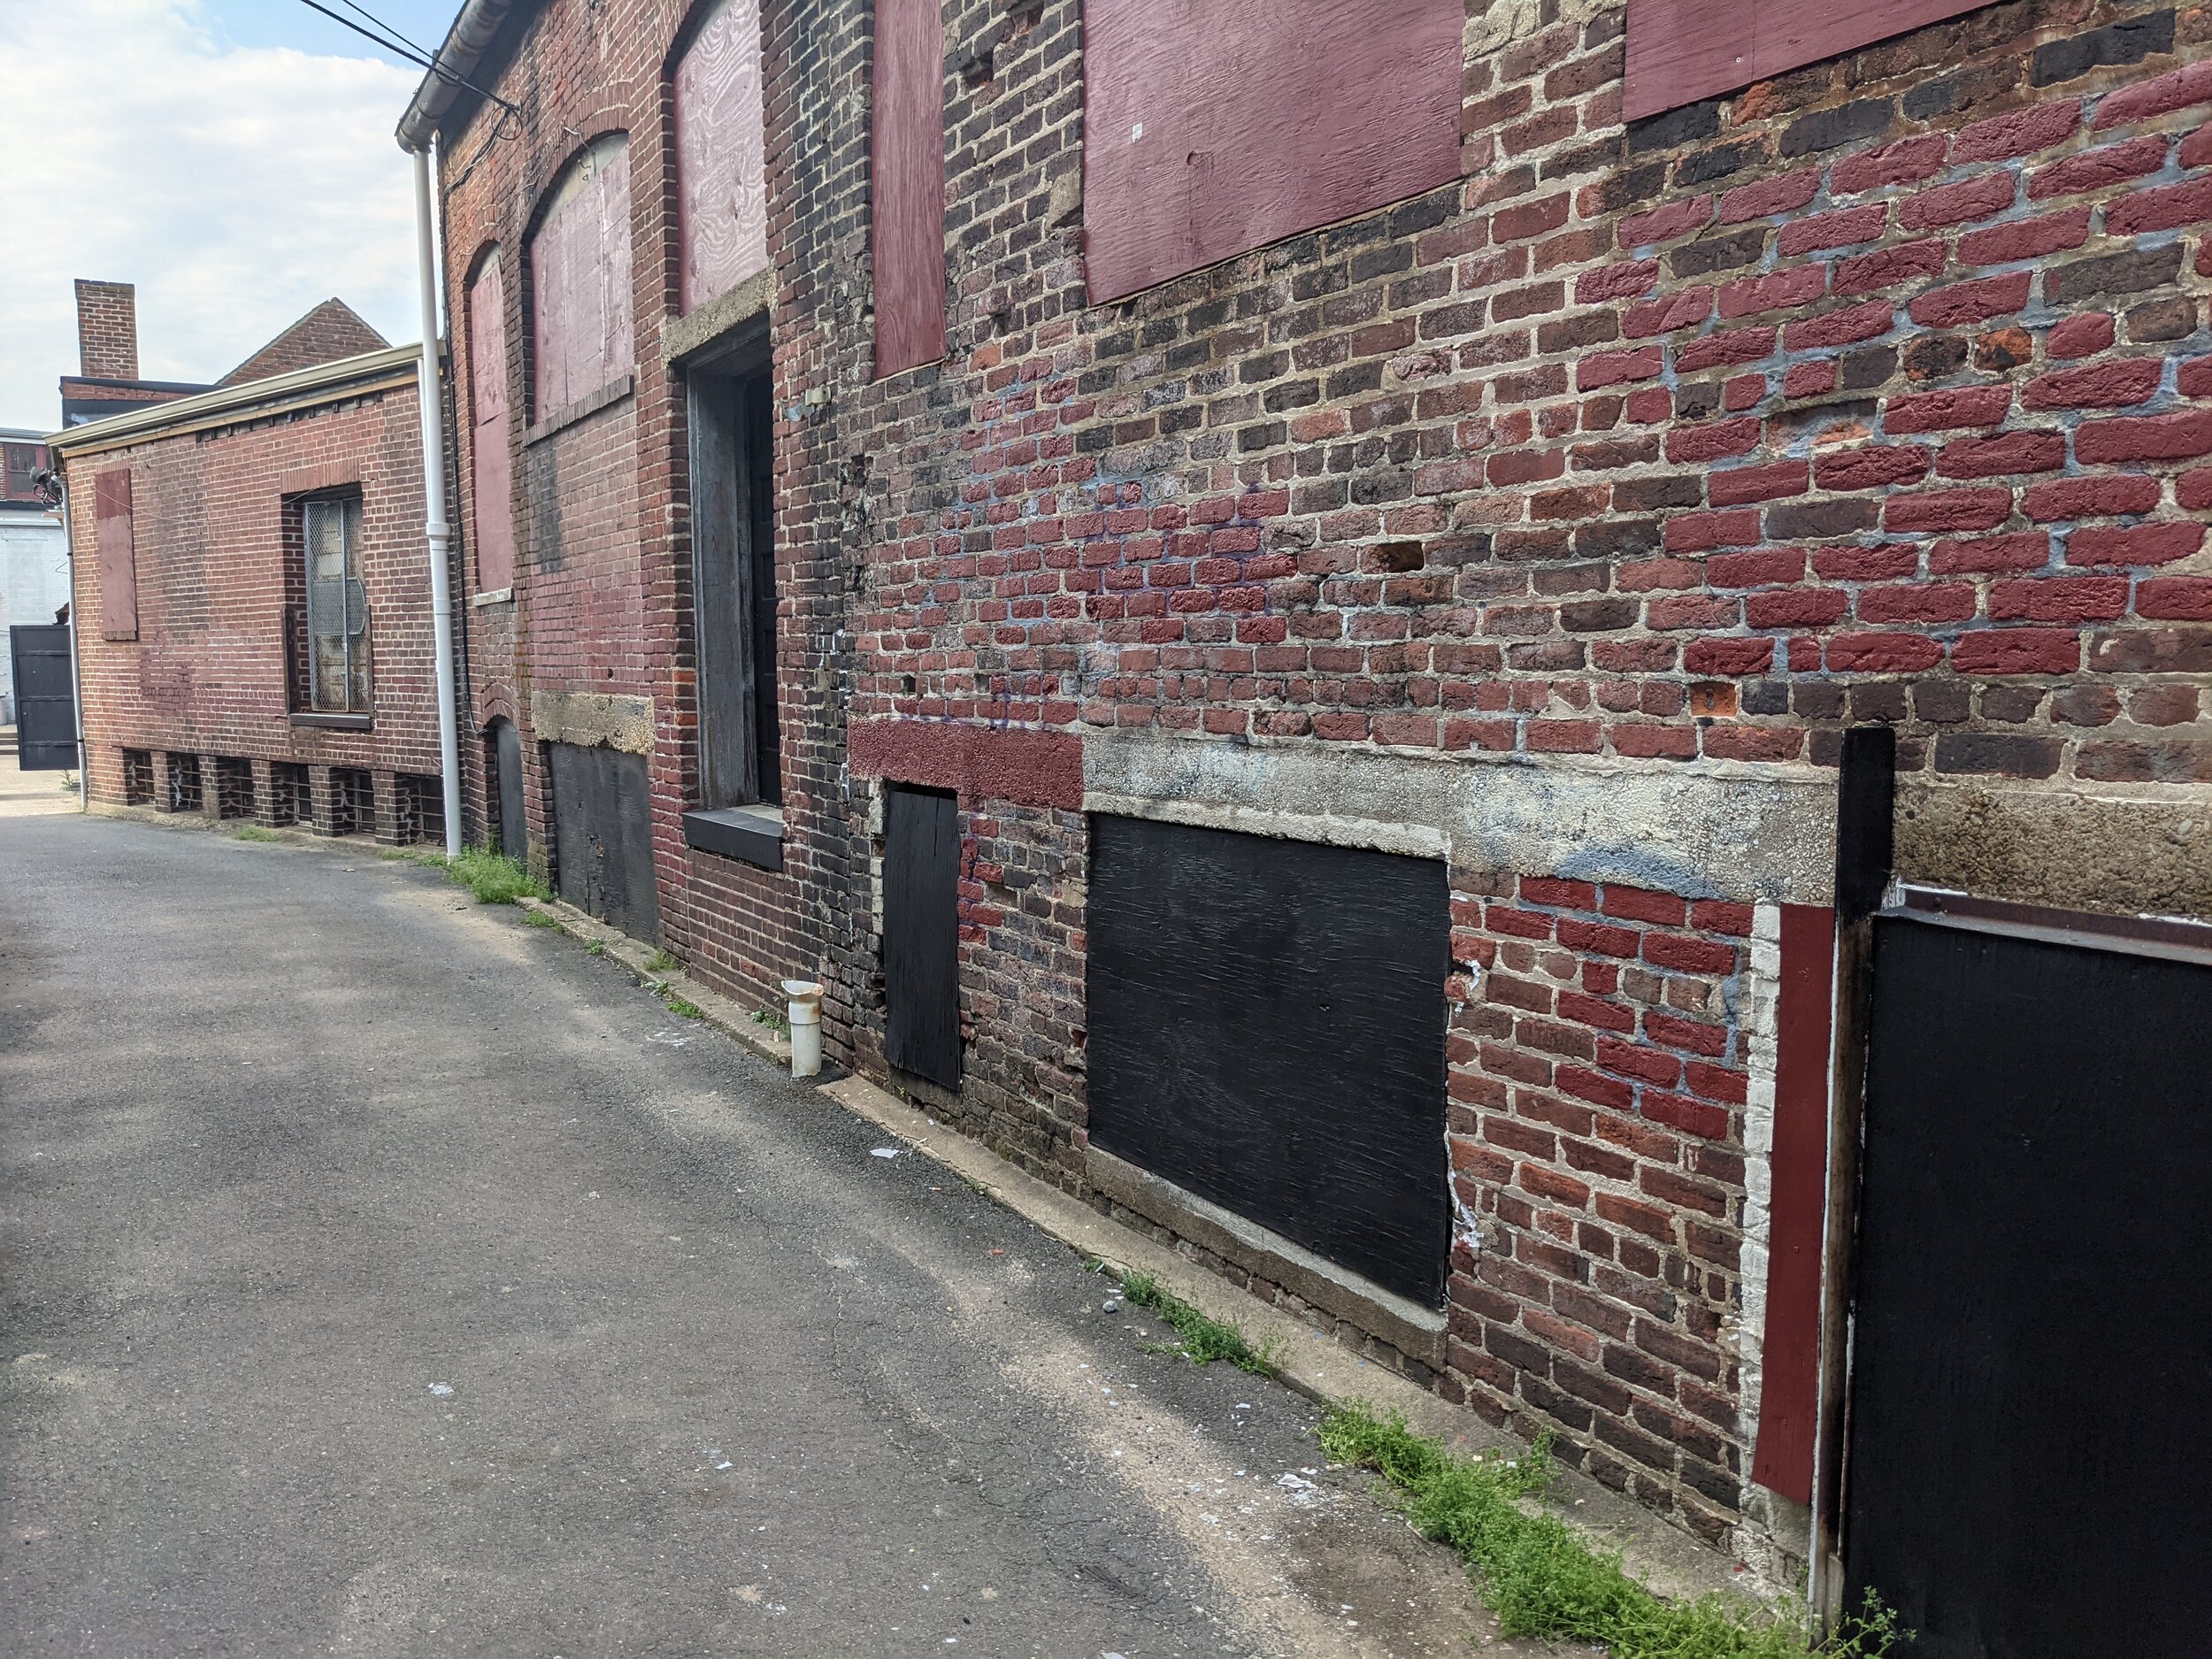  From scouting locations; the alley 